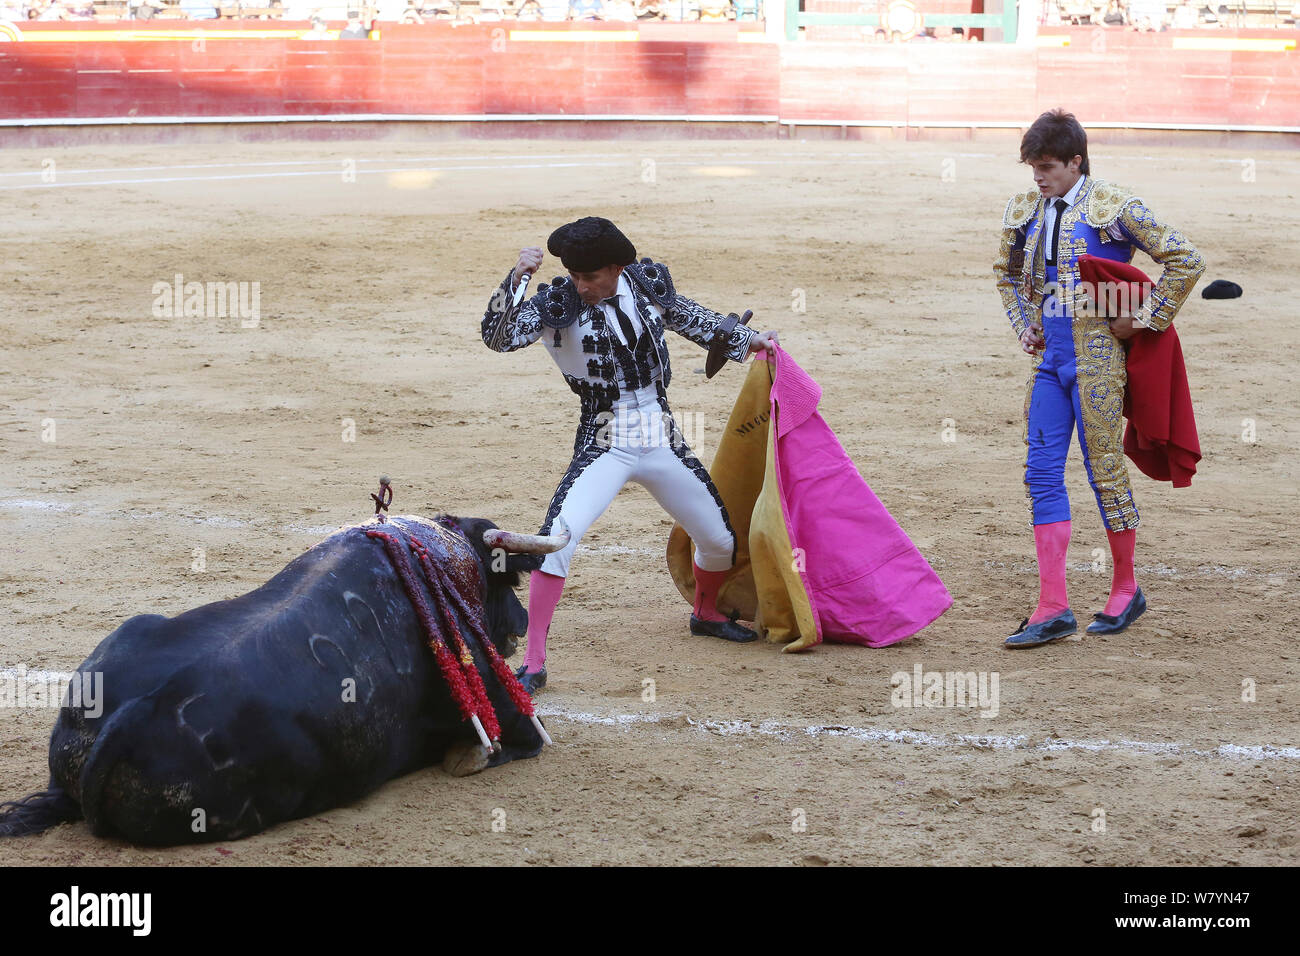 Bull fighting, puntillero about to stab fallen bull through spinal cord, Plaza de Toros, Valencia, Spain. July 2014. Stock Photo